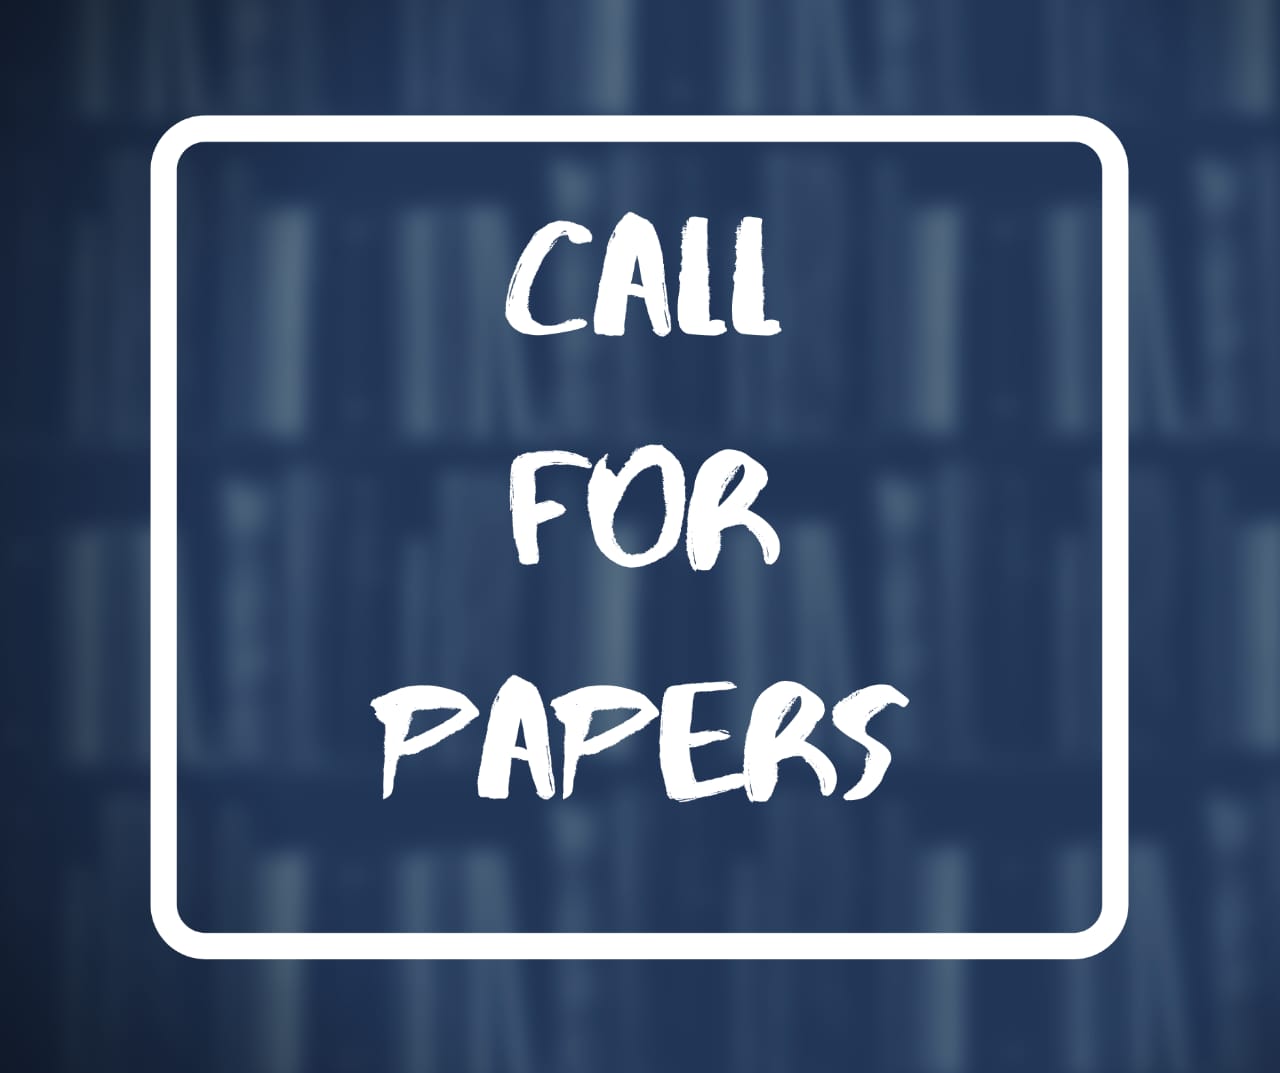 [Call for Papers] at Maharishi Journal for Law & Society, Vol. IV Issue I with ISSN: 2581- 8007, RNI: UPENG/2018/7632 [Submit by 25 November 2022]